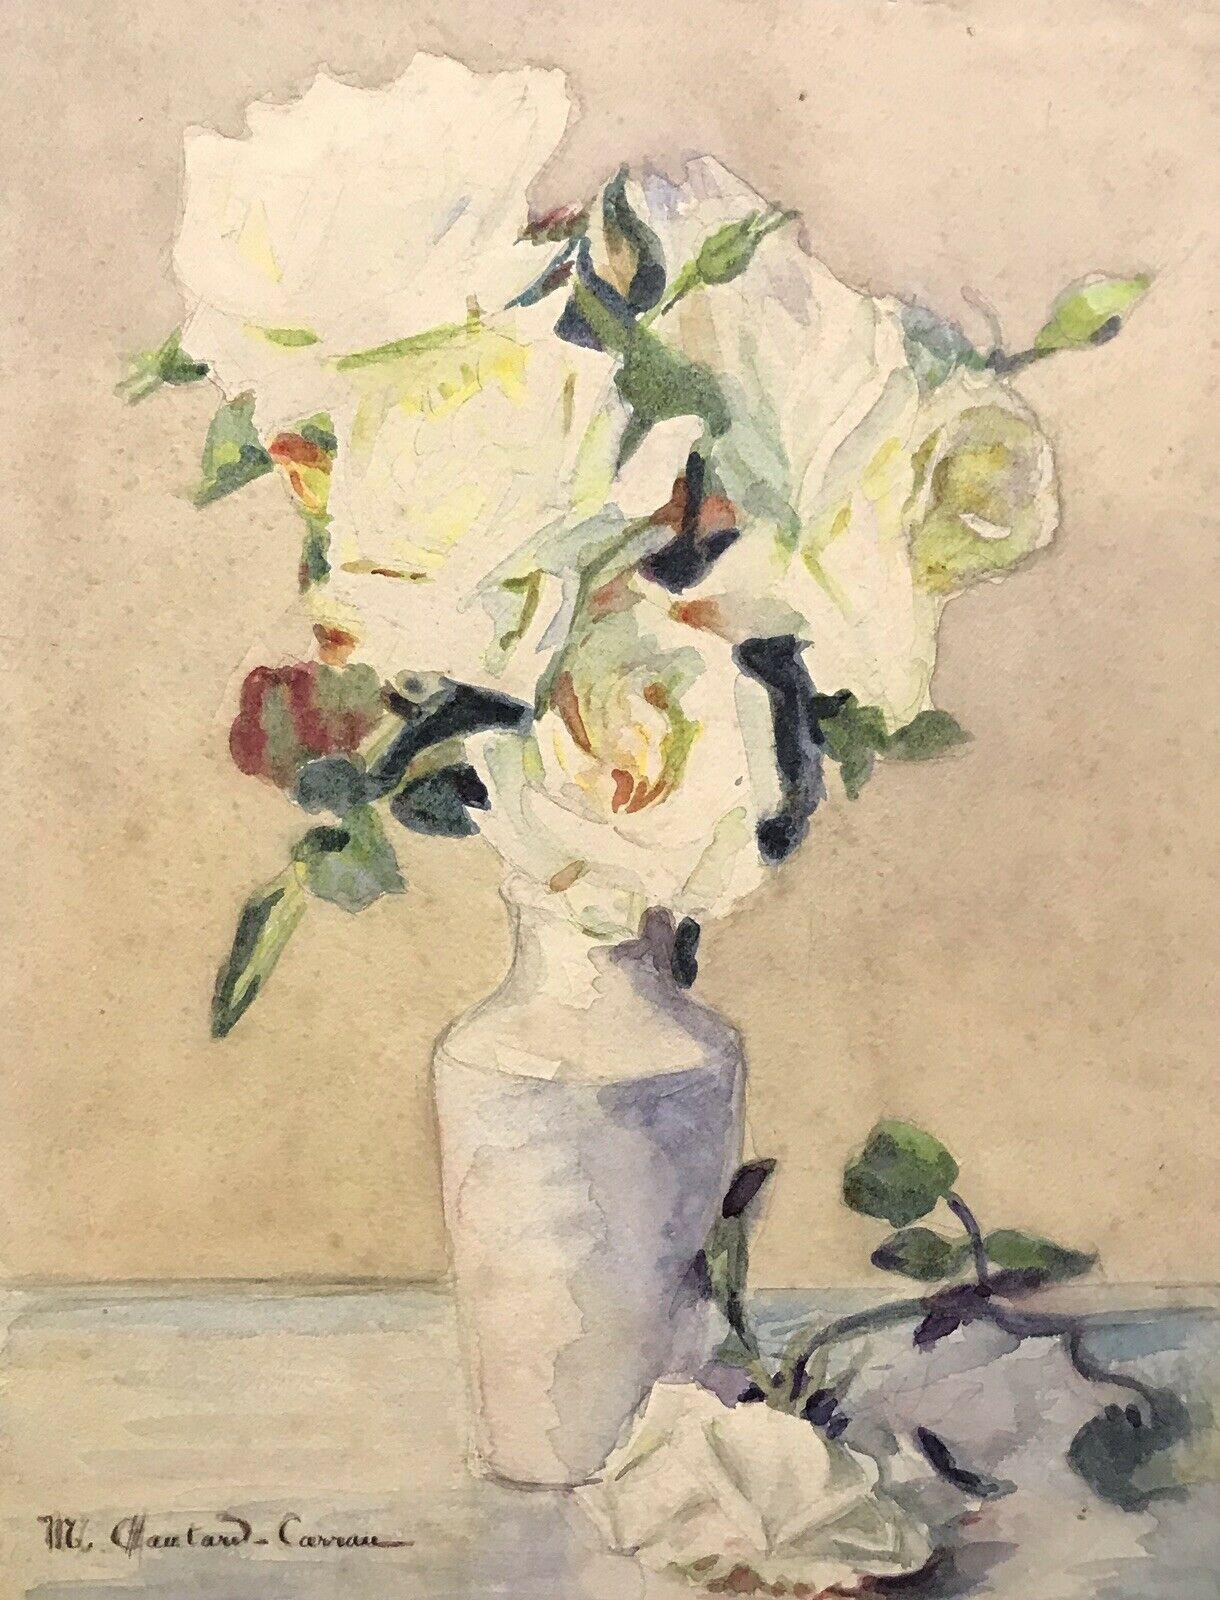 Marie-Amelie Chautard-Carreau Abstract Painting - MARIE CHAUTARD-CARREAU - FINE EARLY 20thC FRENCH IMPRESSIONIST- ROSES IN VASE